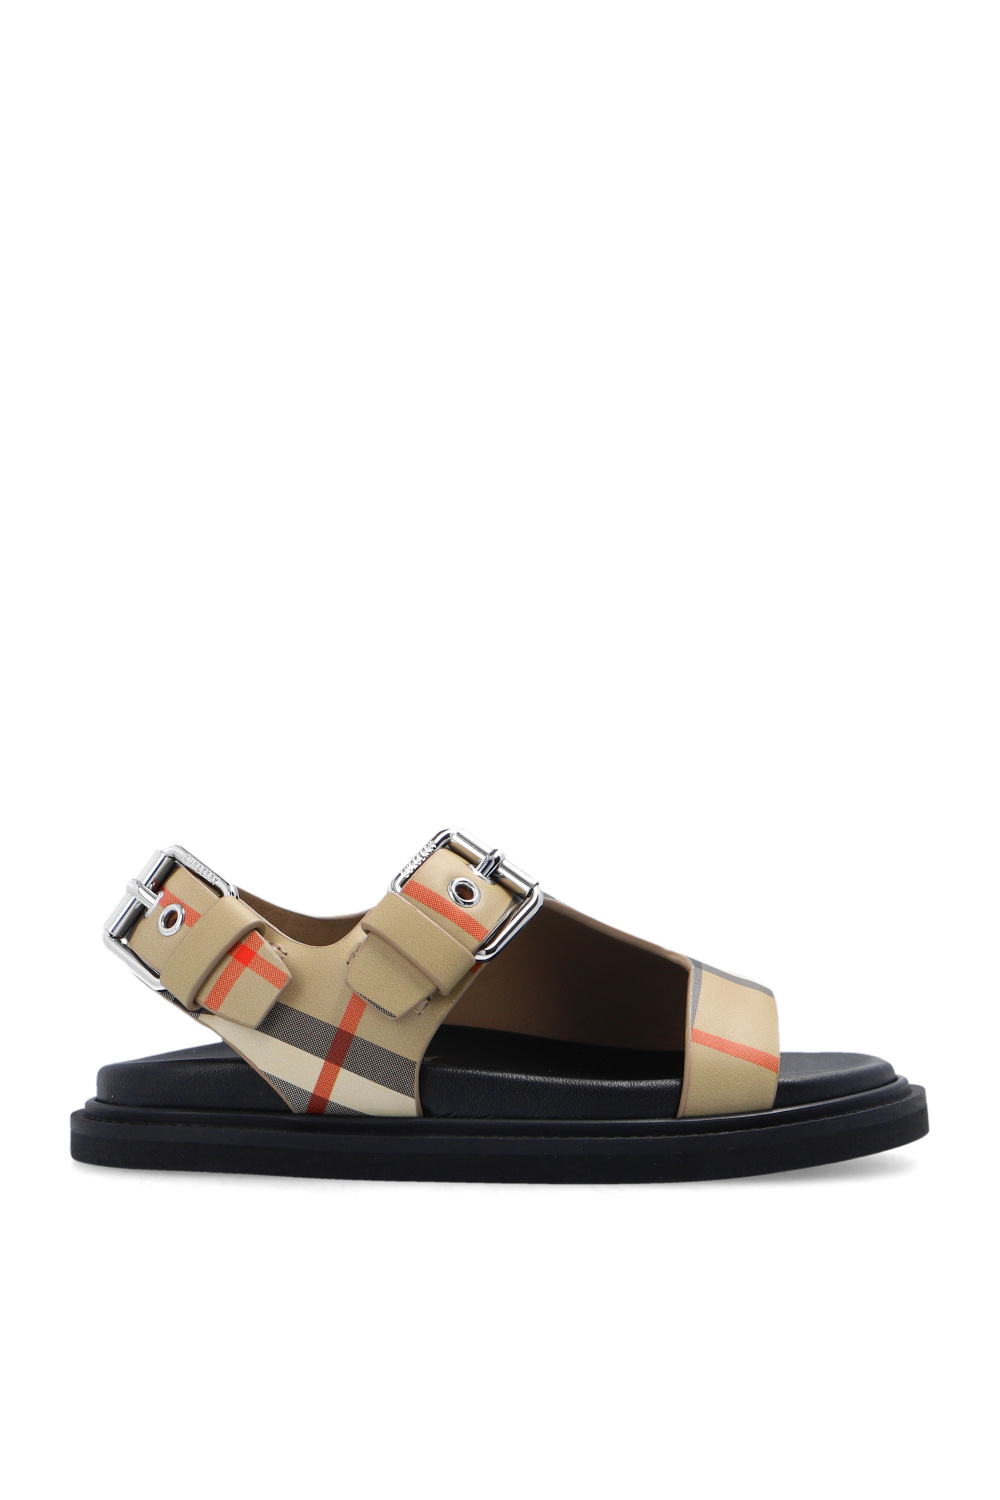 Burberry Kids TRACKed sandals